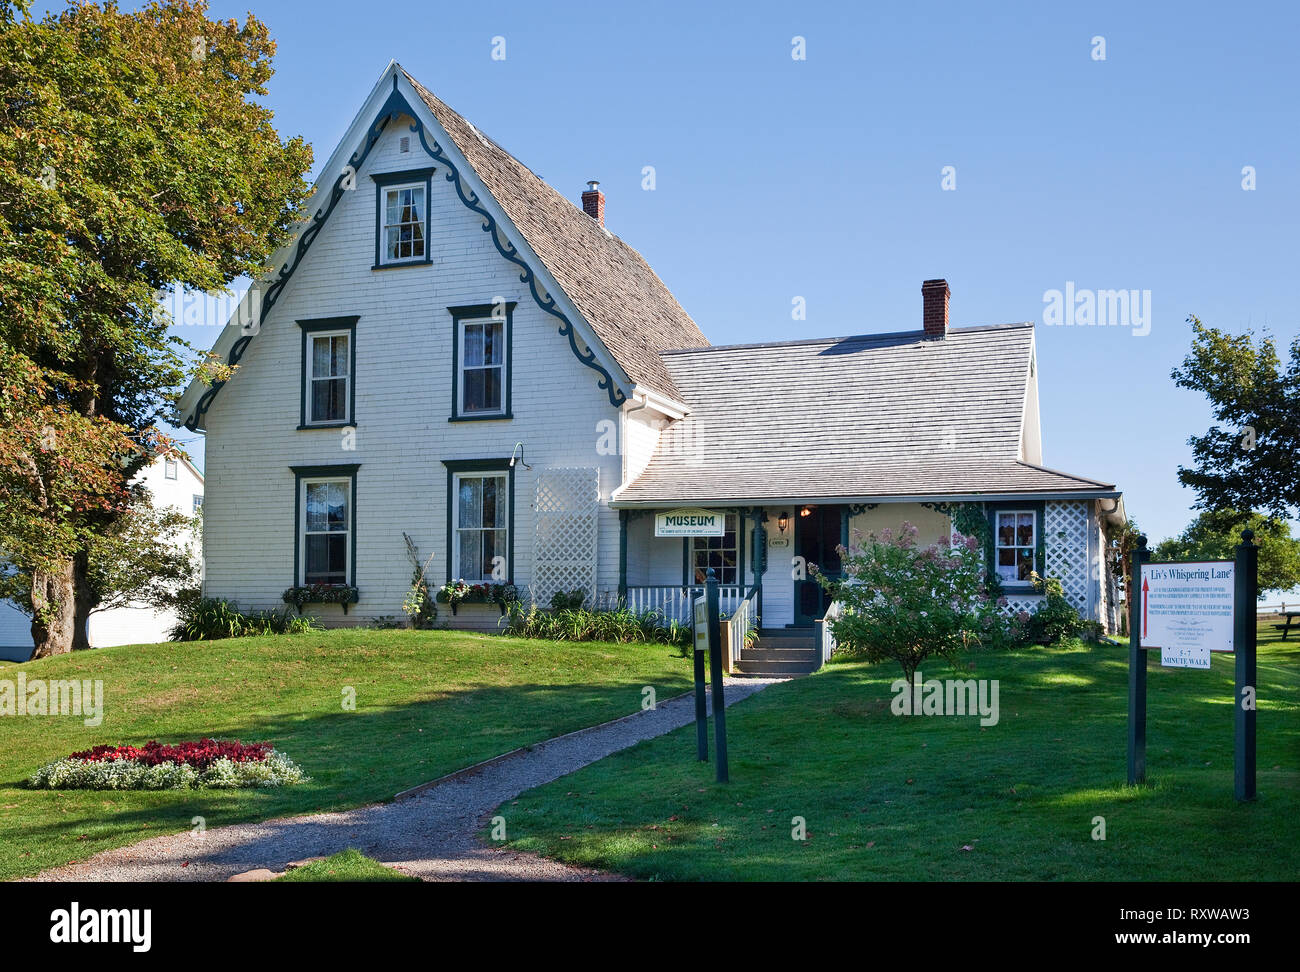 Anne of Green Gables Museum is where the book's author, Lucy Maud Montgomery, spent a part of childhood and which served as the inspiration for many of her stories, Park Corner, Prince Edward Island, Canada Stock Photo